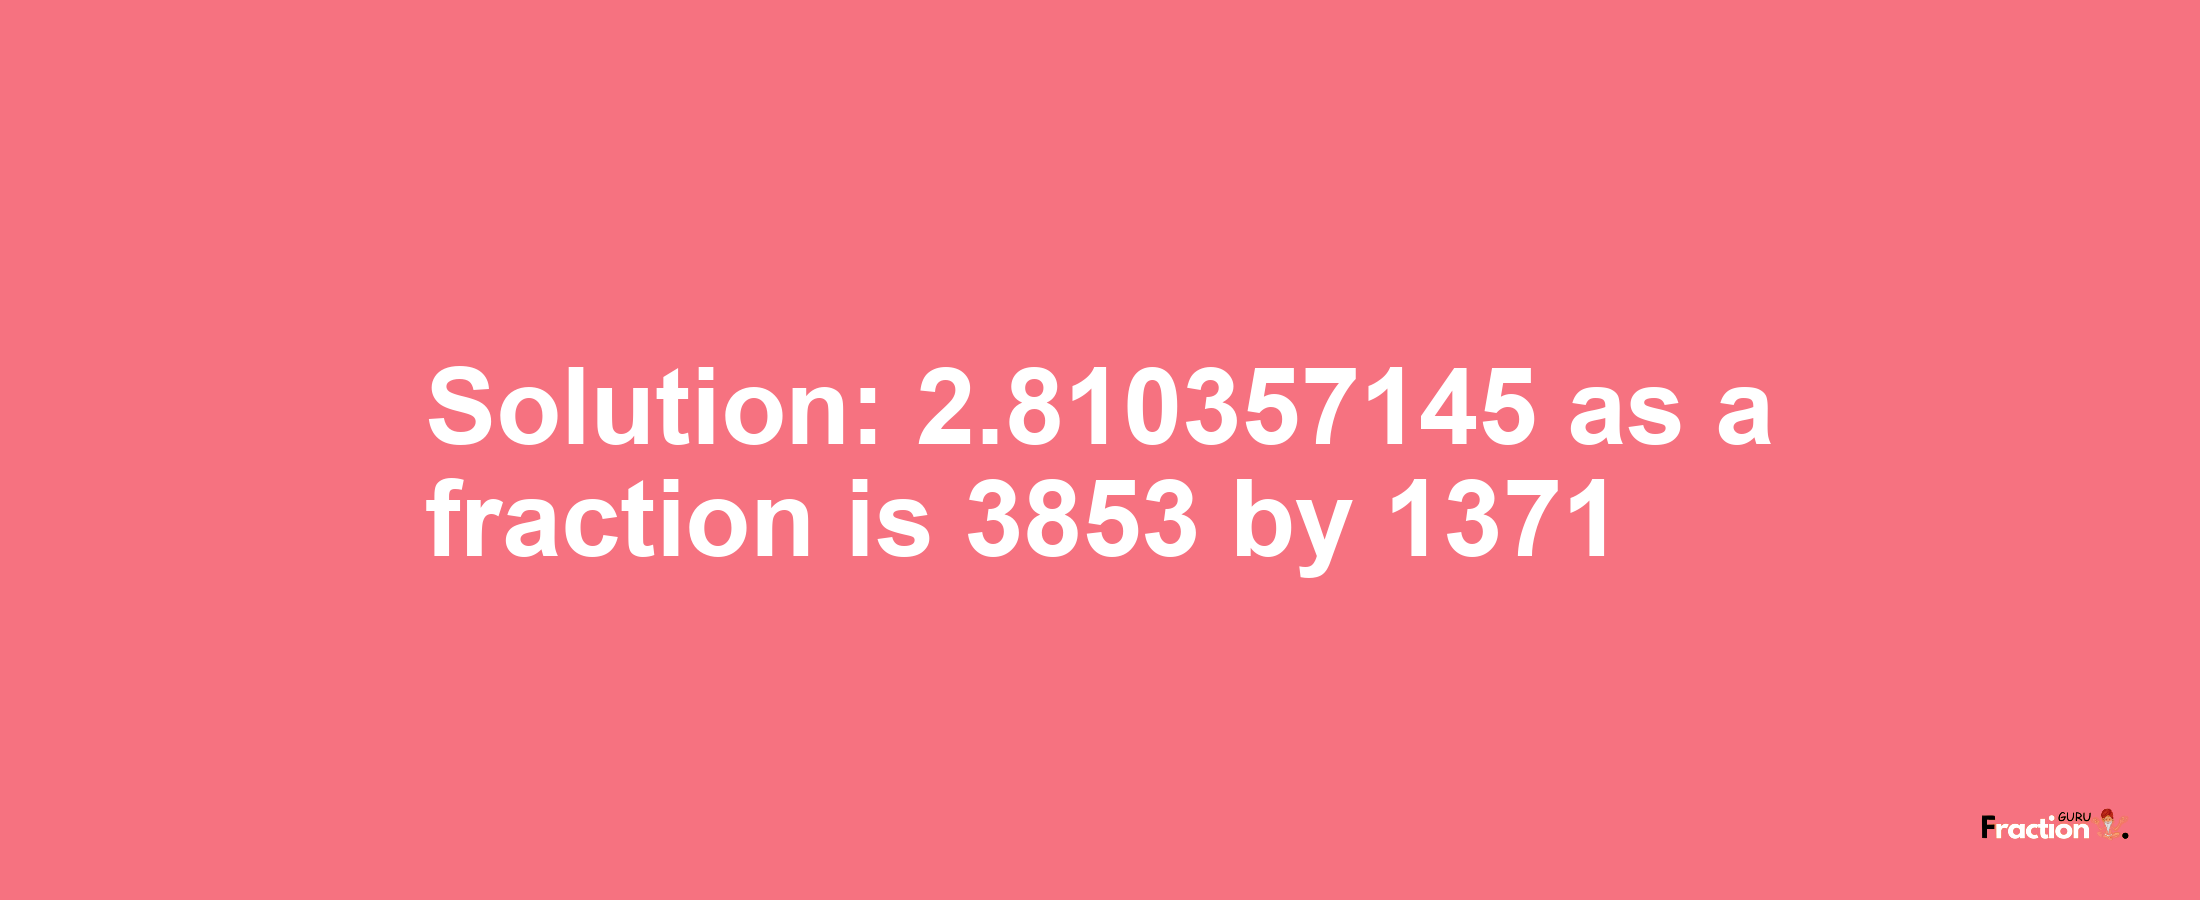 Solution:2.810357145 as a fraction is 3853/1371